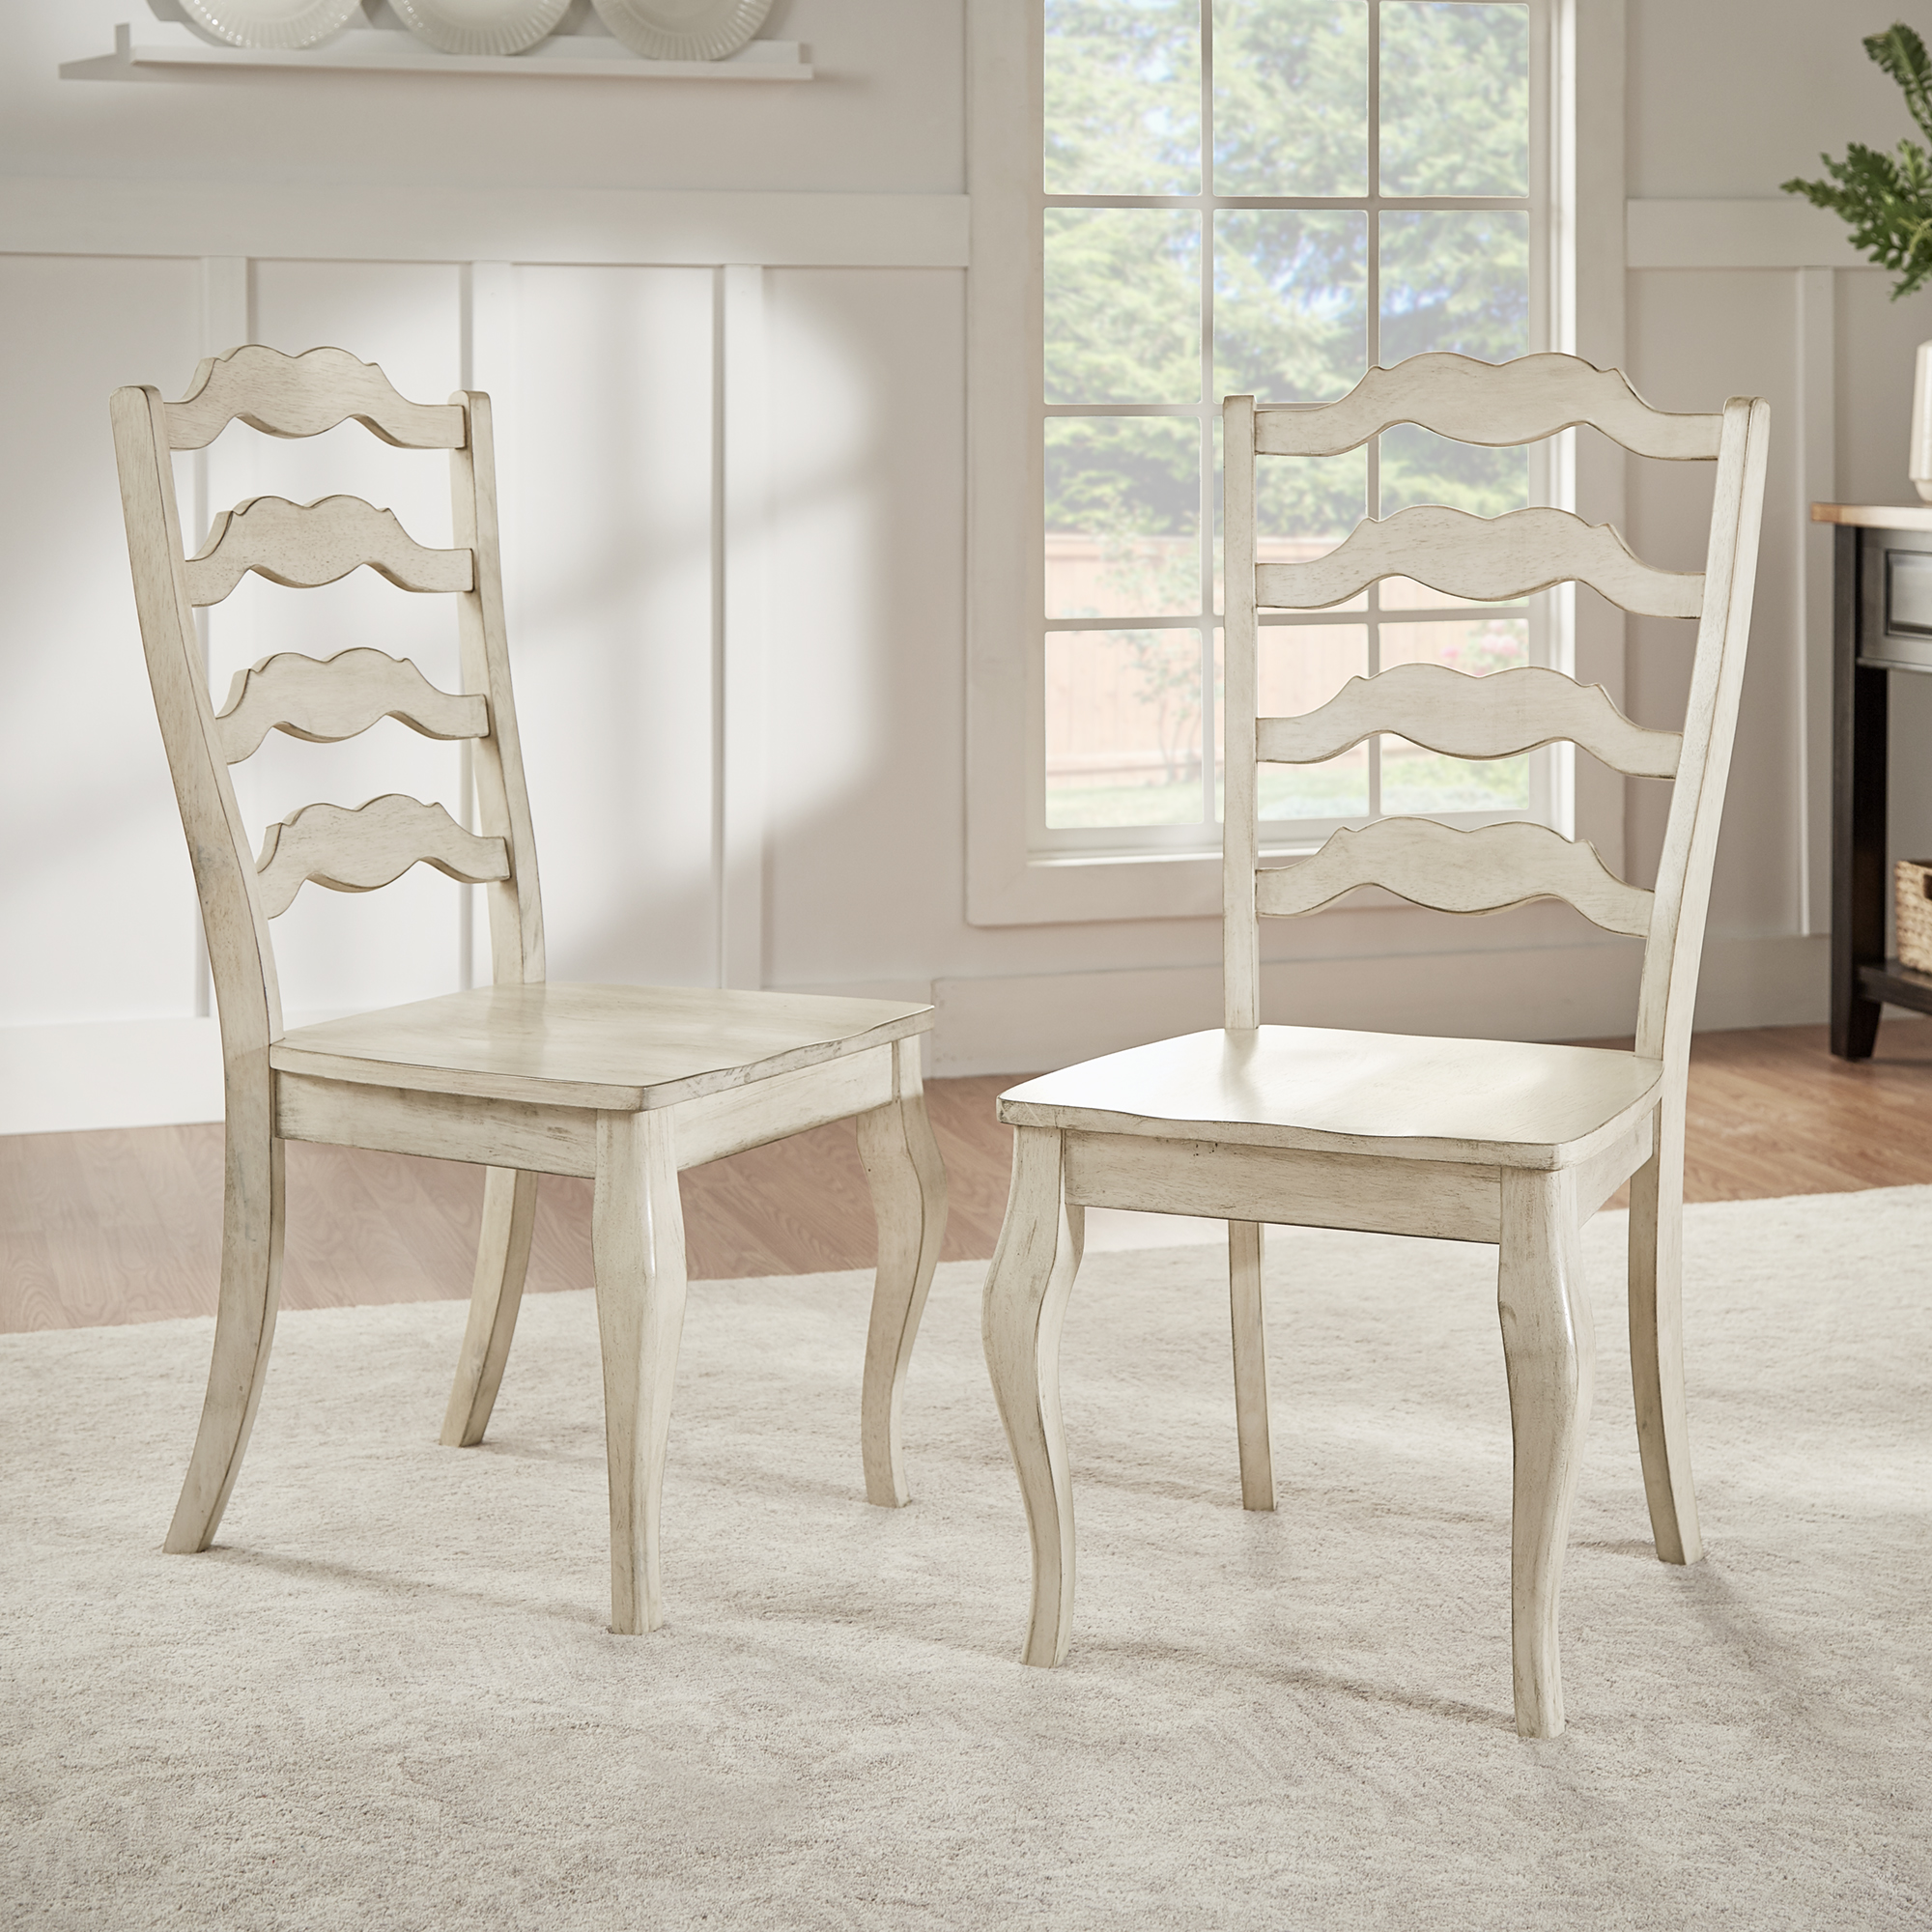 French Ladder Back Wood Dining Chairs (Set of 2)